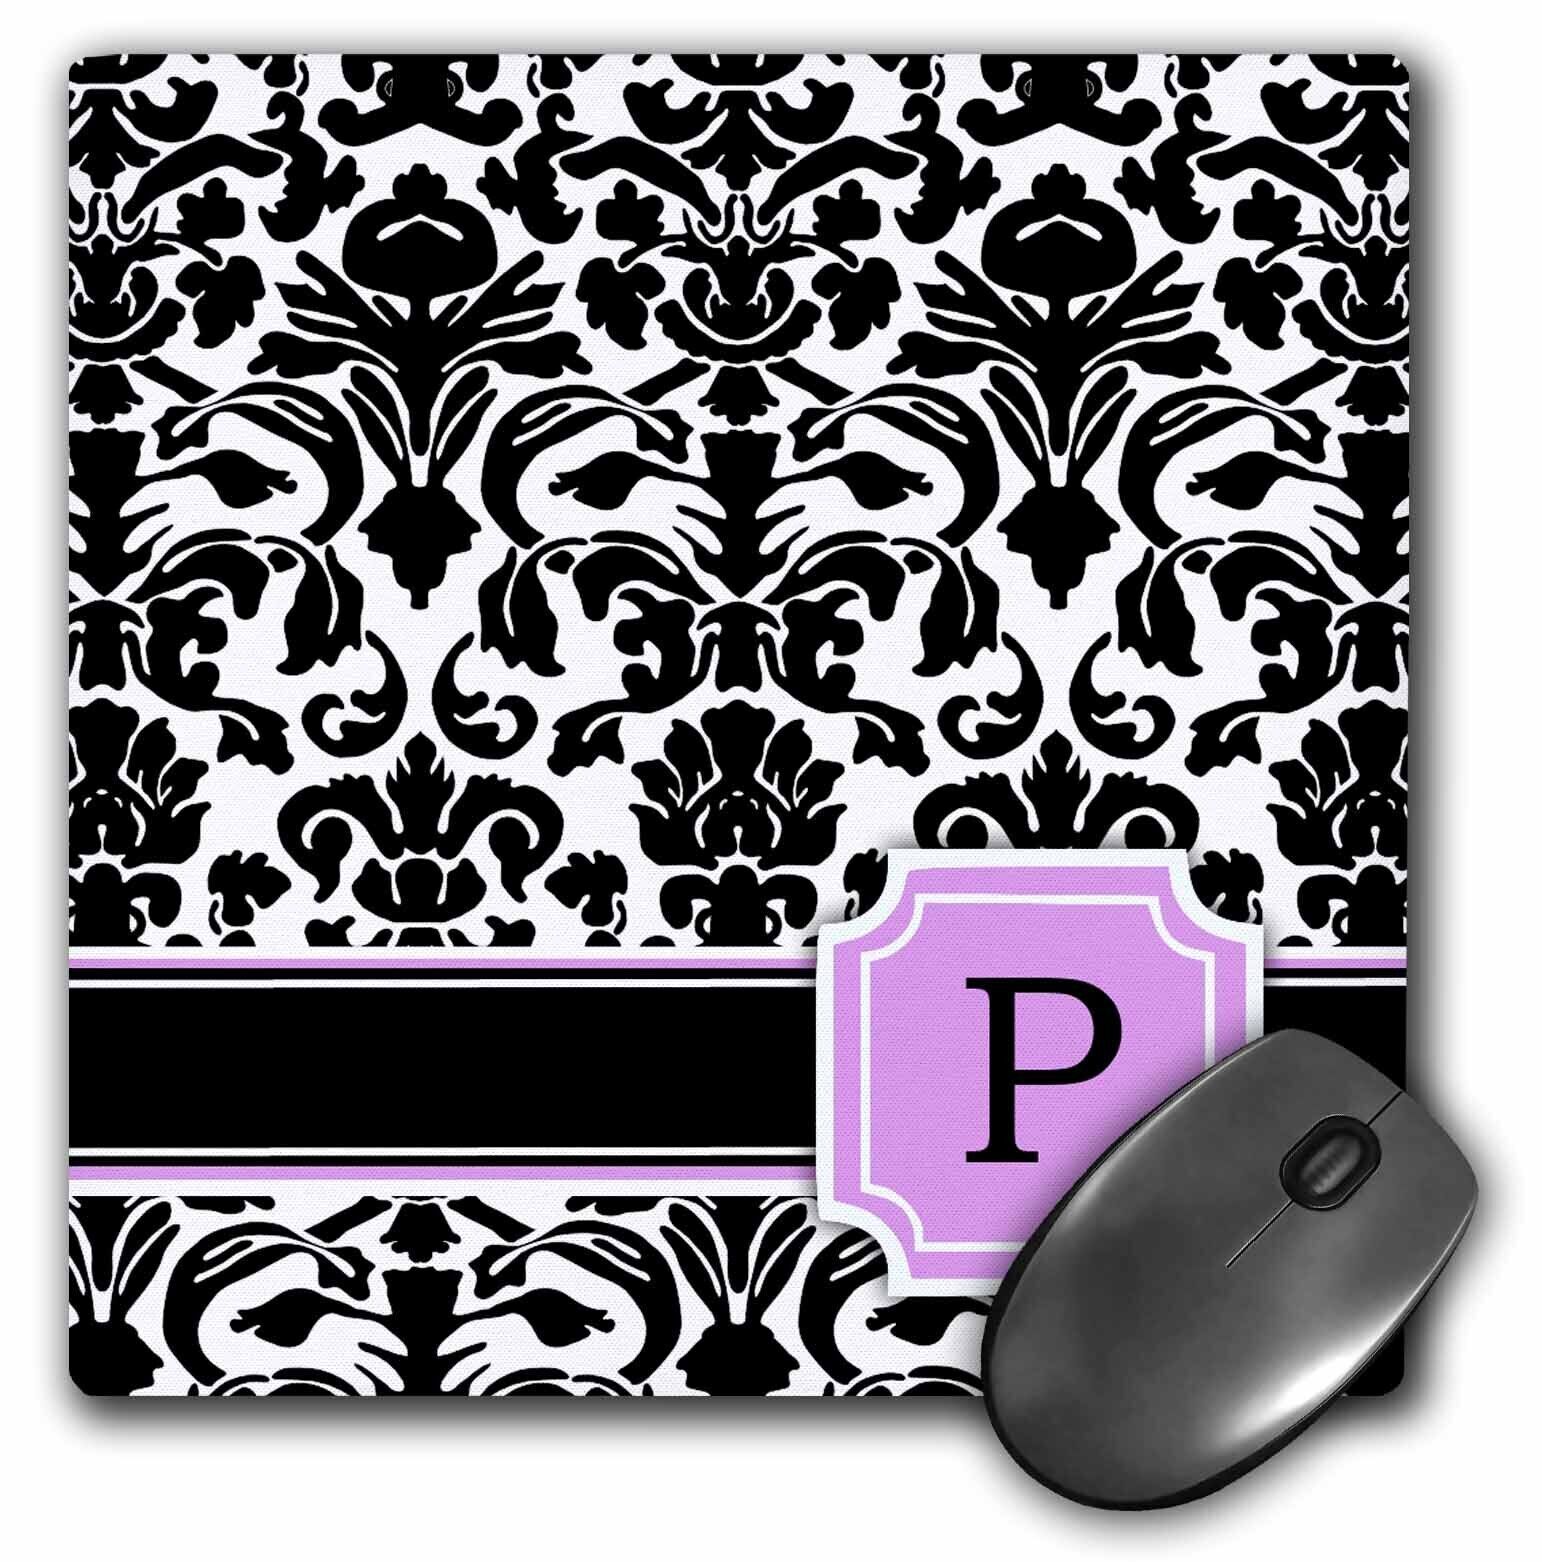 3dRose Personal initial P monogrammed pink black and white damask pattern girly